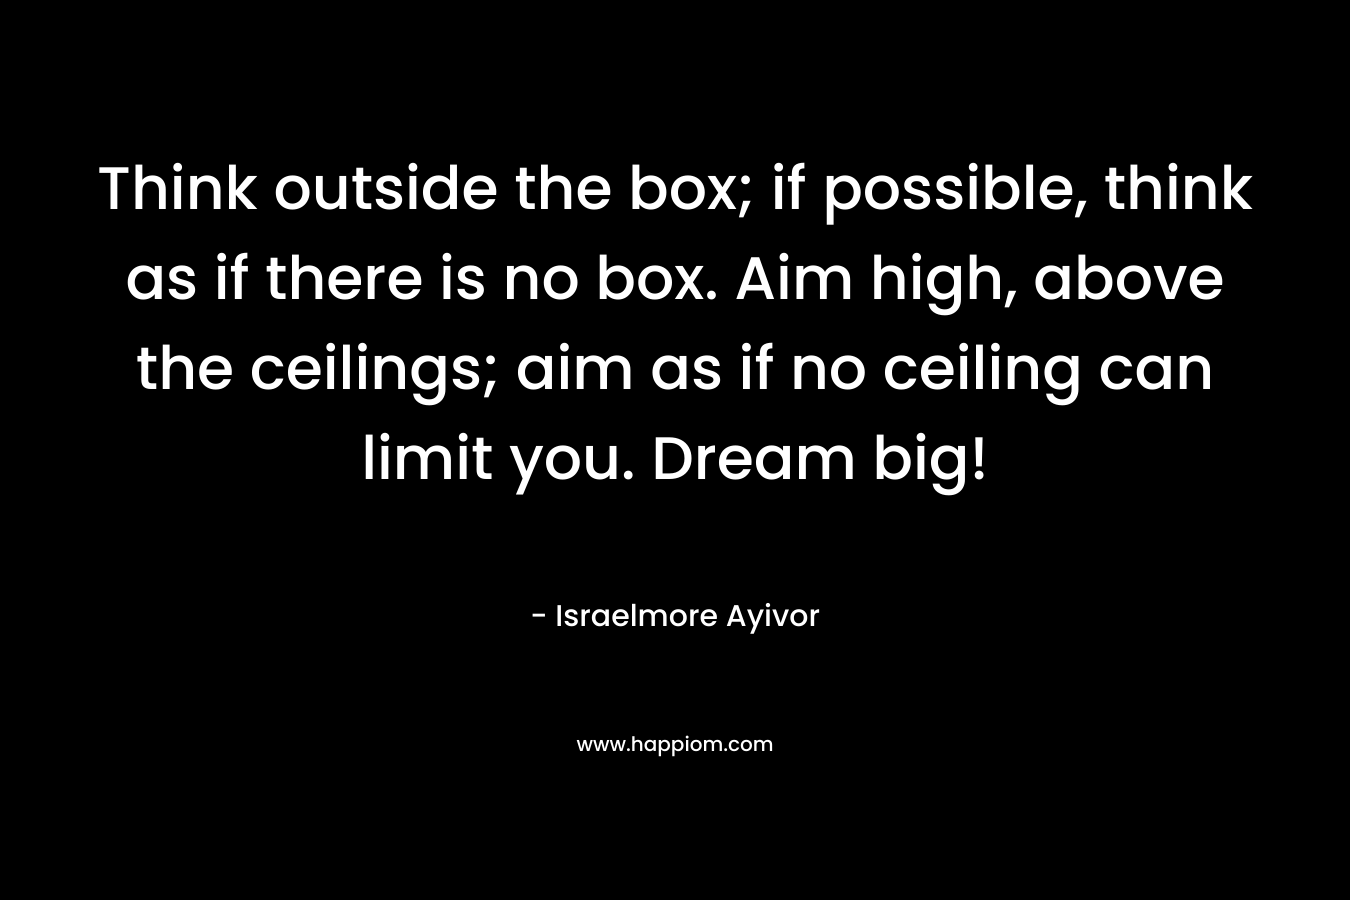 Think outside the box; if possible, think as if there is no box. Aim high, above the ceilings; aim as if no ceiling can limit you. Dream big!